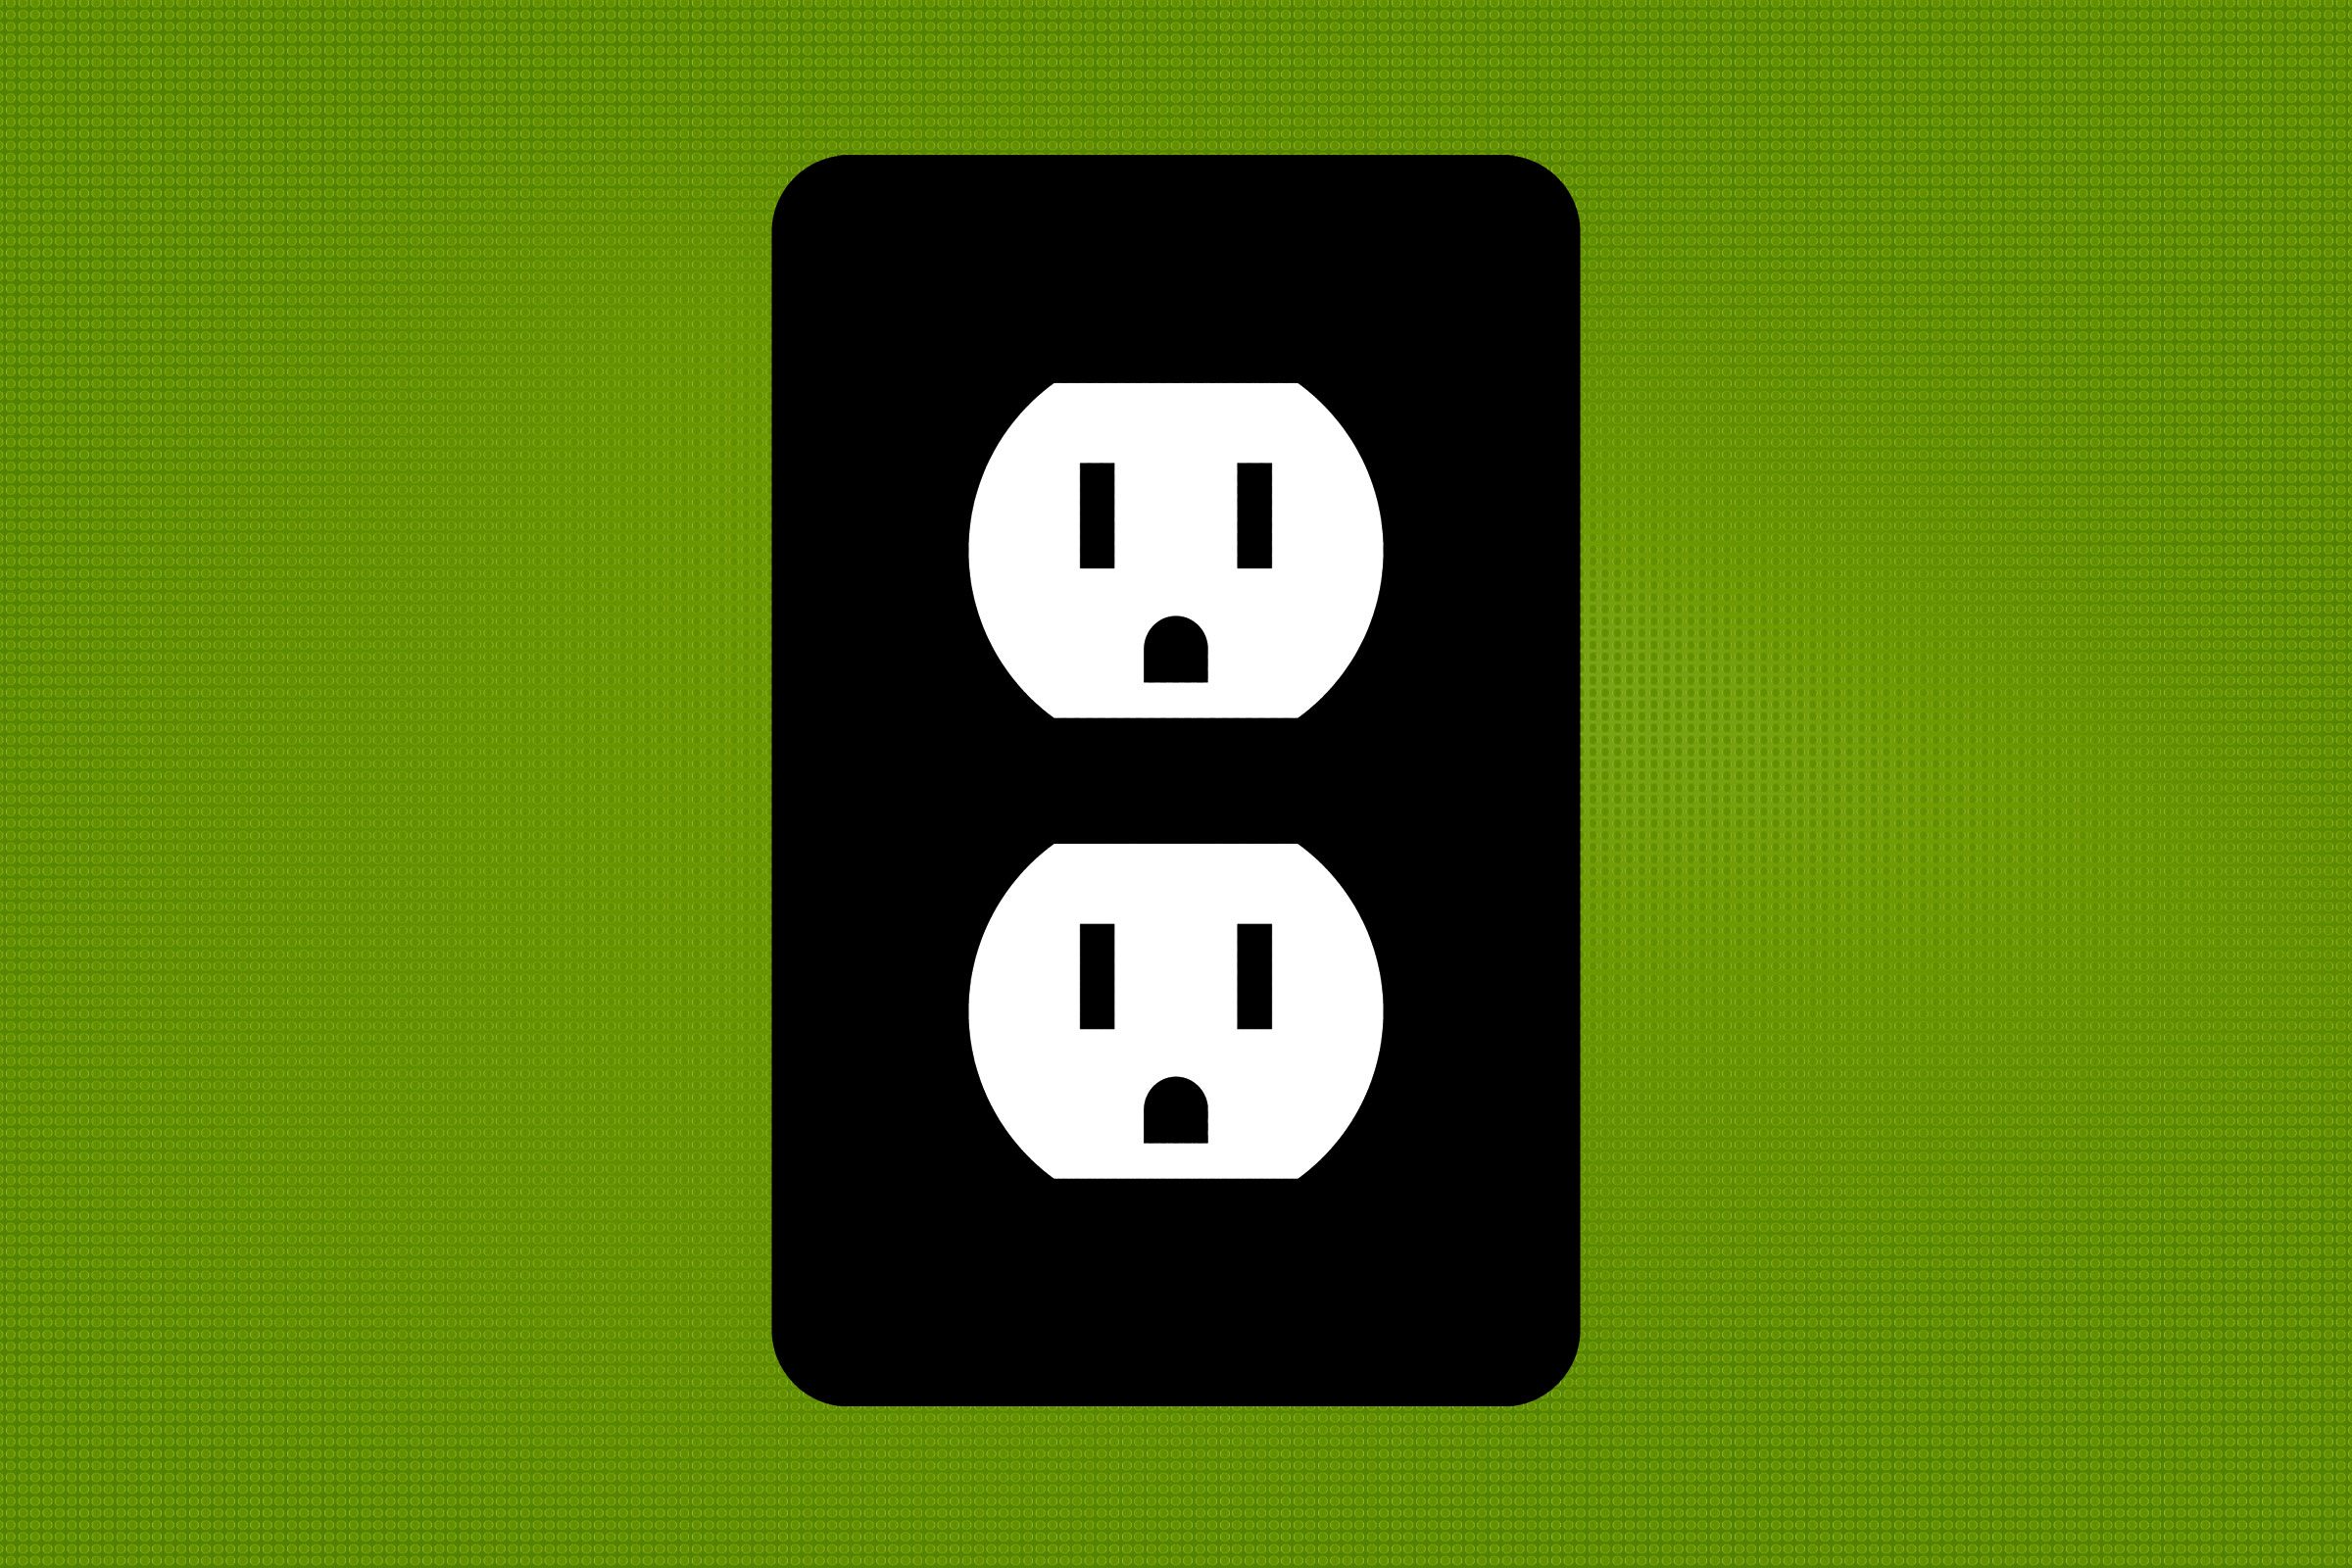 wall socket icon on a green background